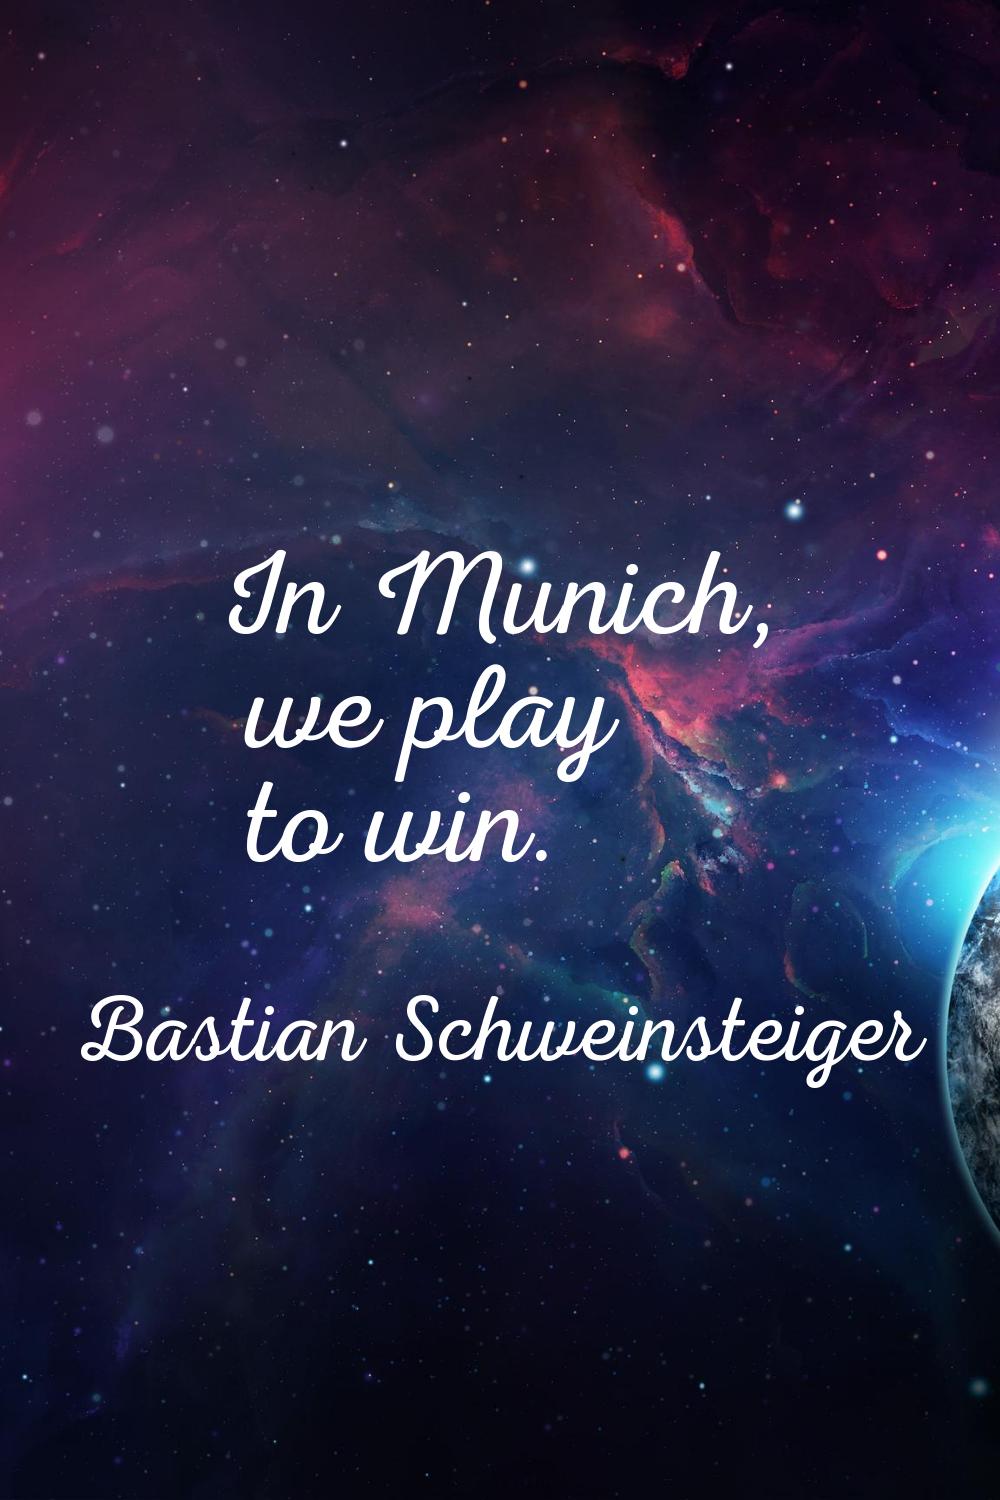 In Munich, we play to win.